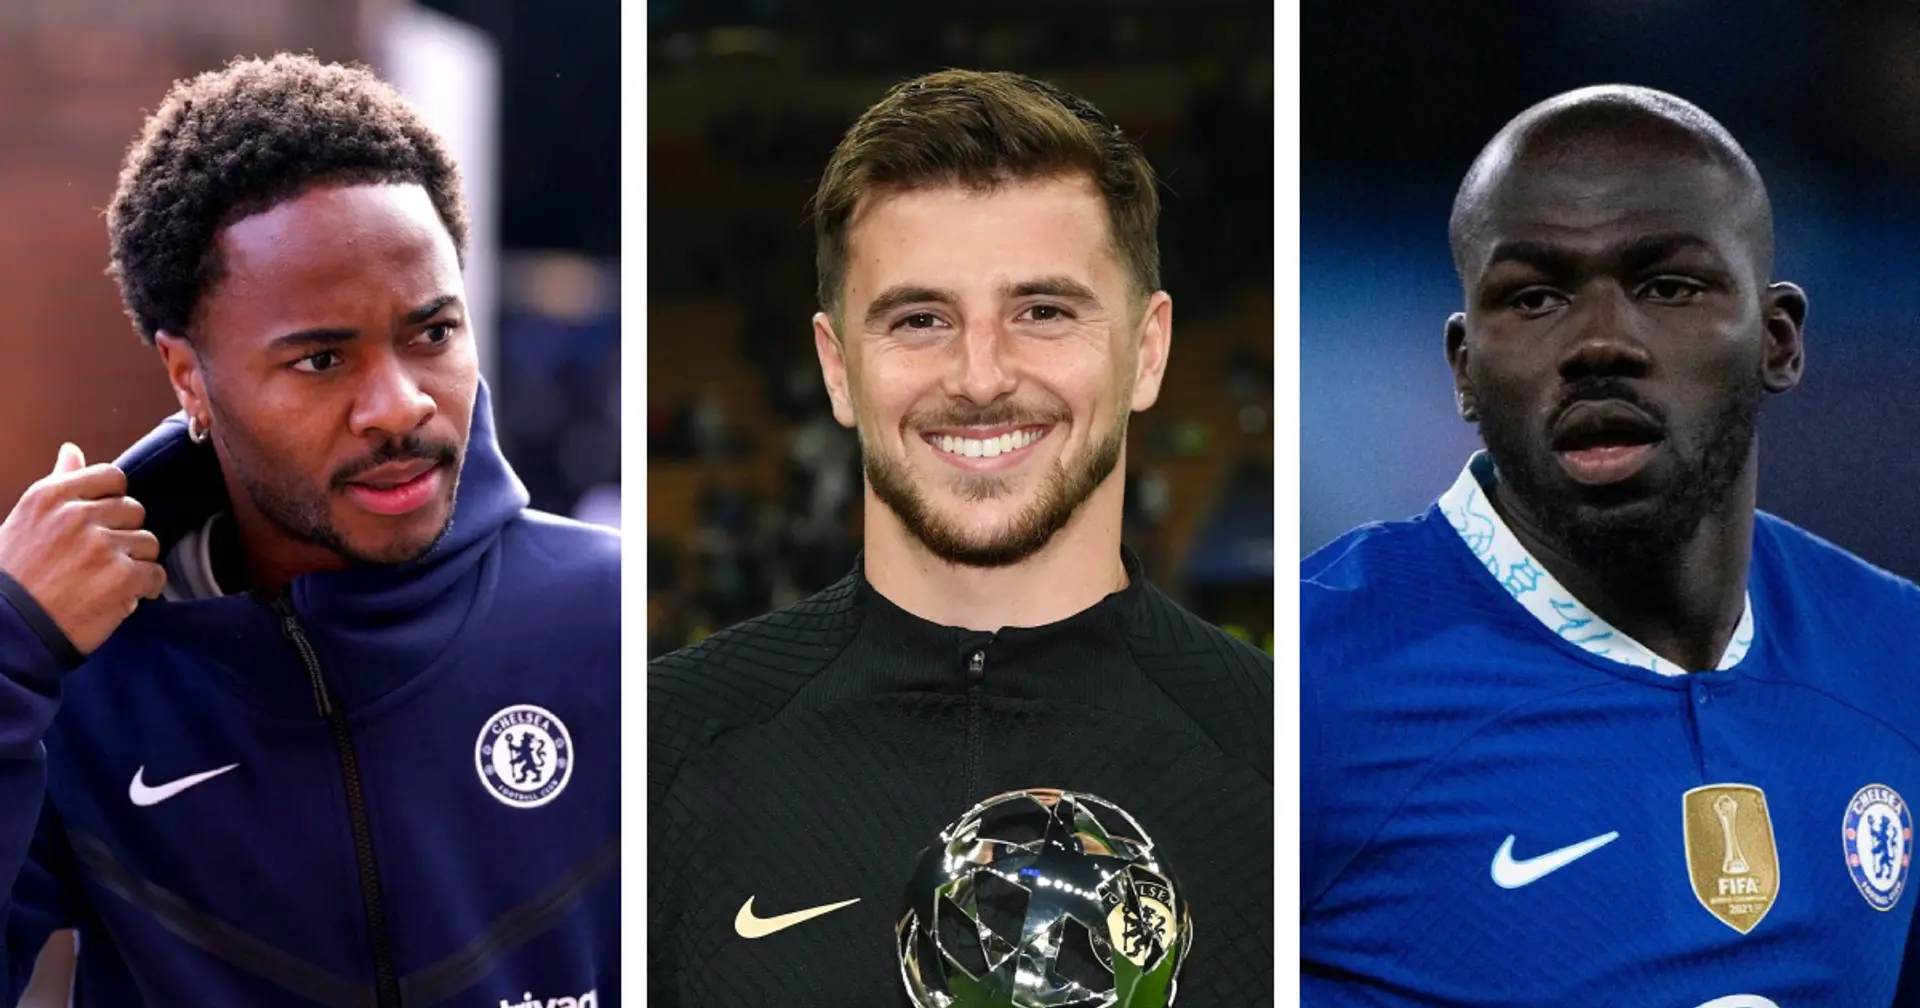 Mount top, 4 new players in: 11 most valuable Chelsea players revealed